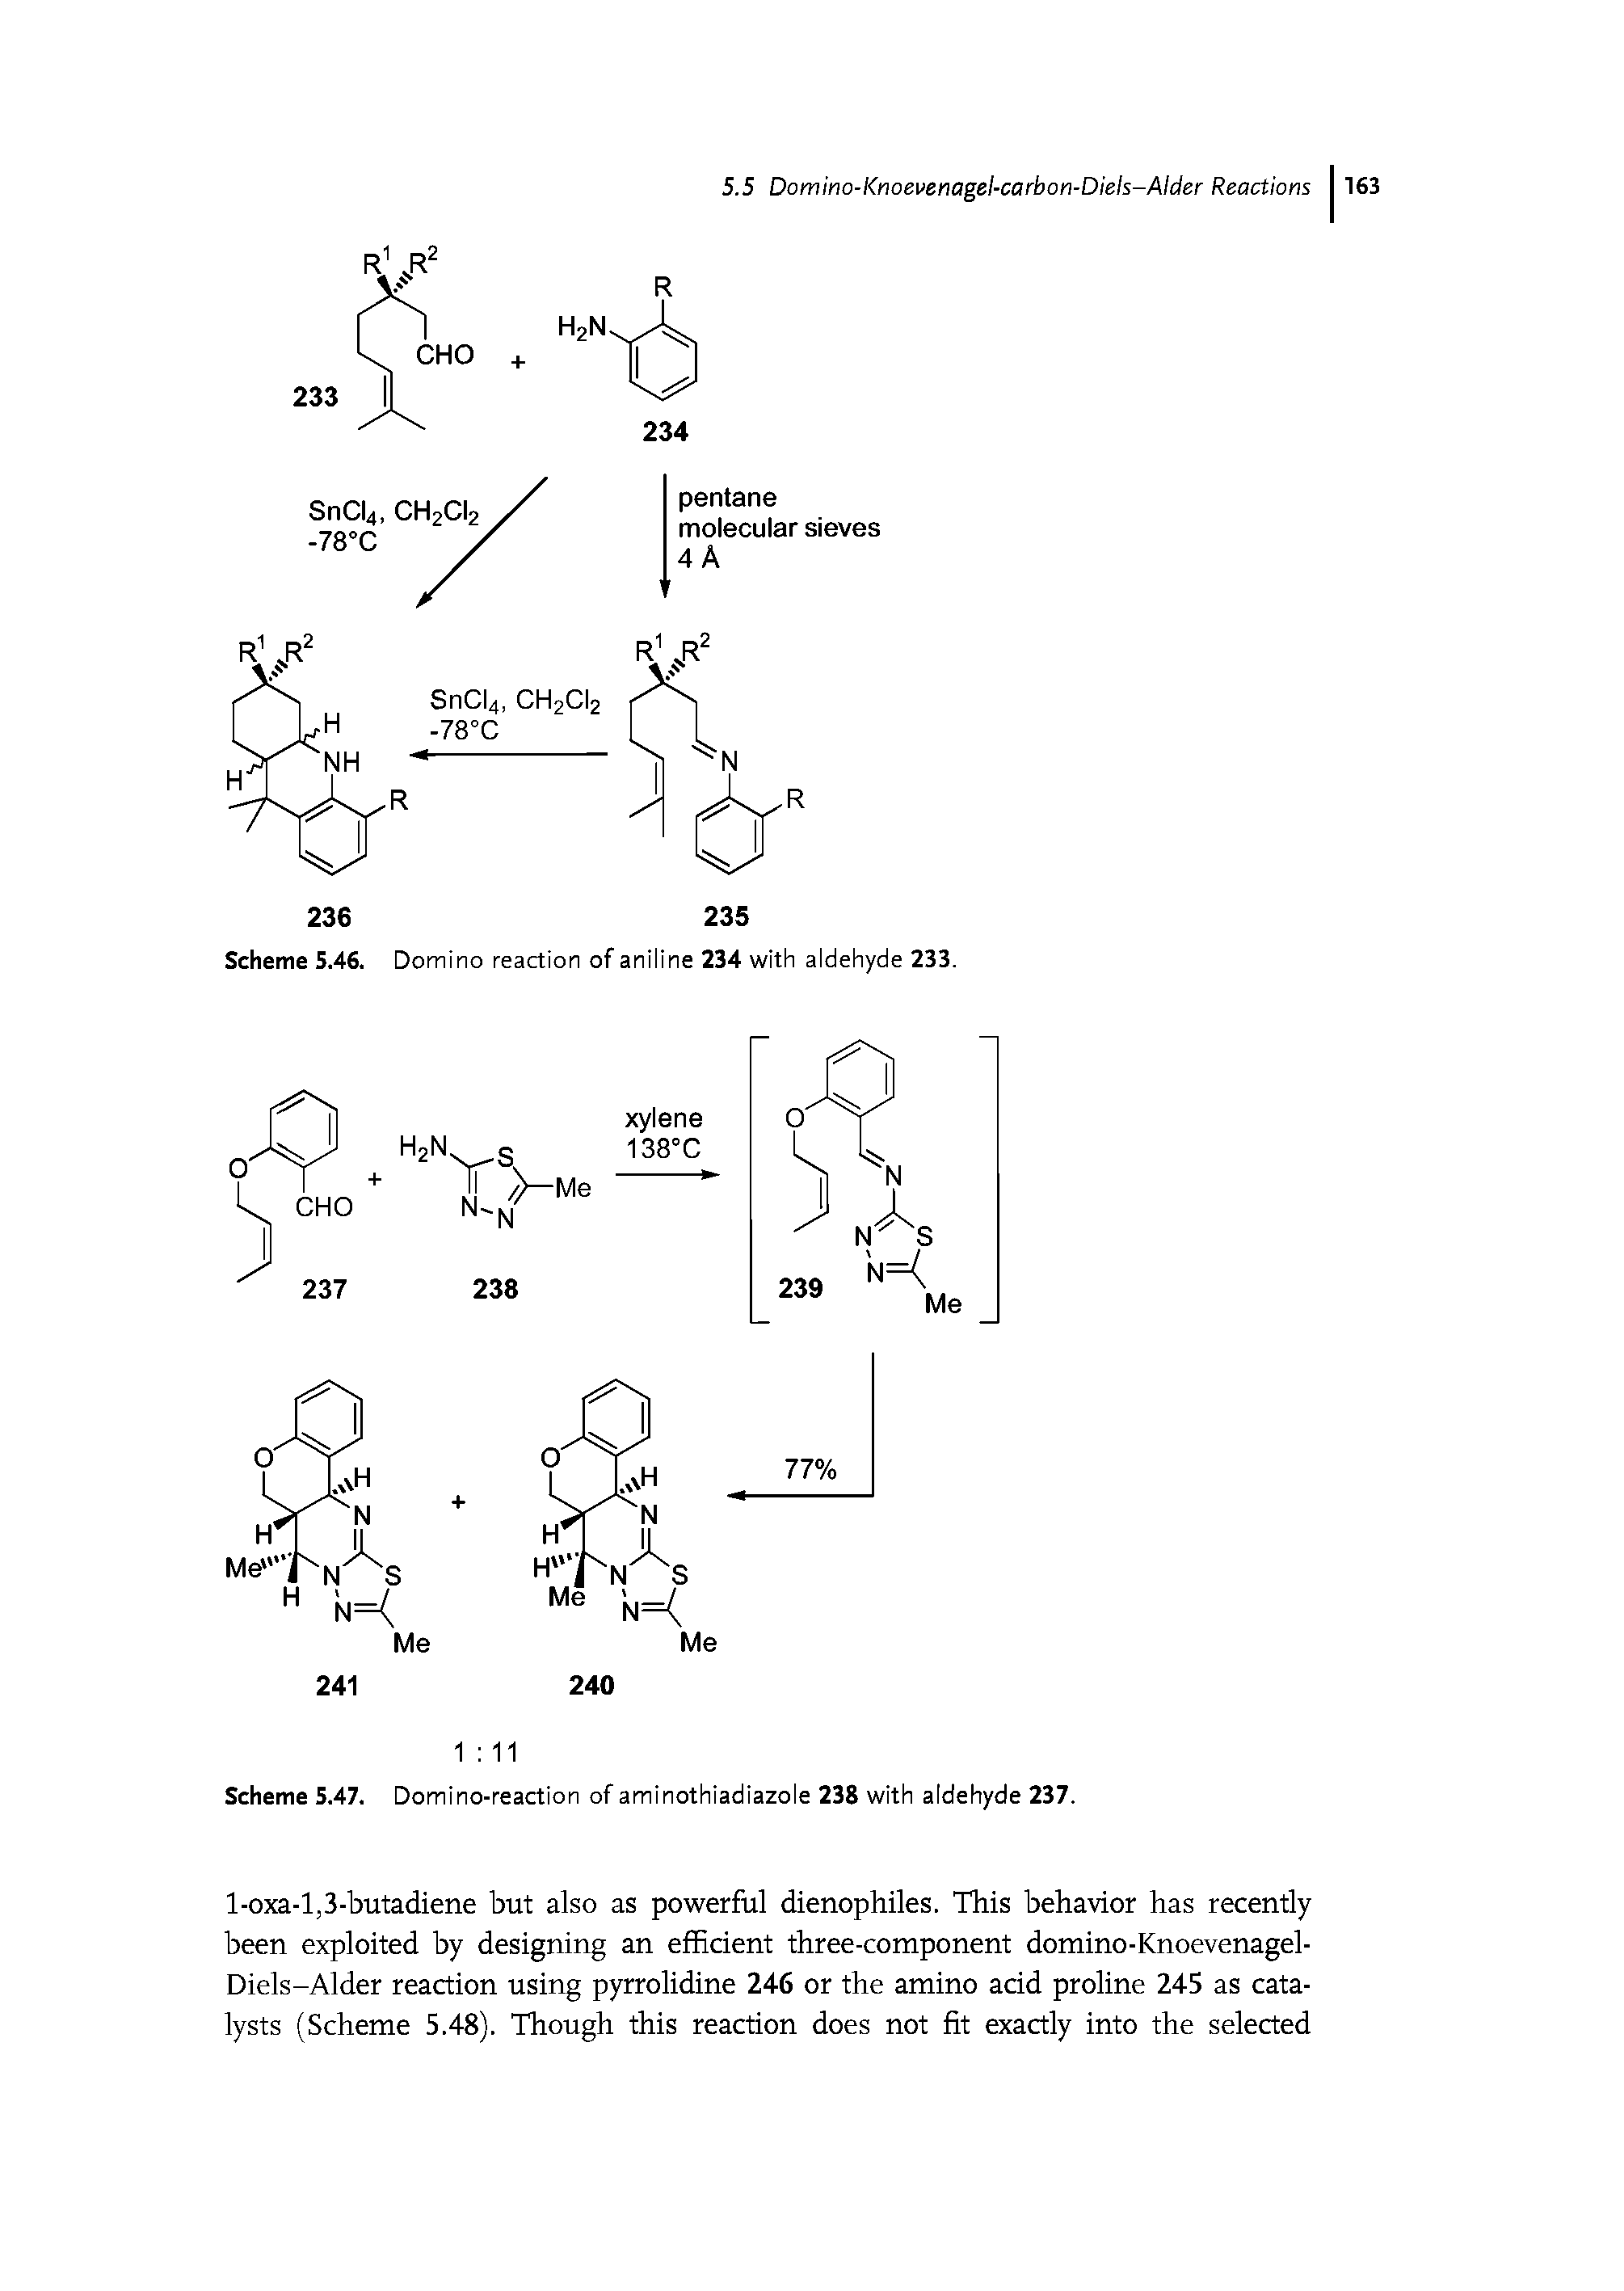 Scheme 5.46. Domino reaction of aniline 234 with aldehyde 233.